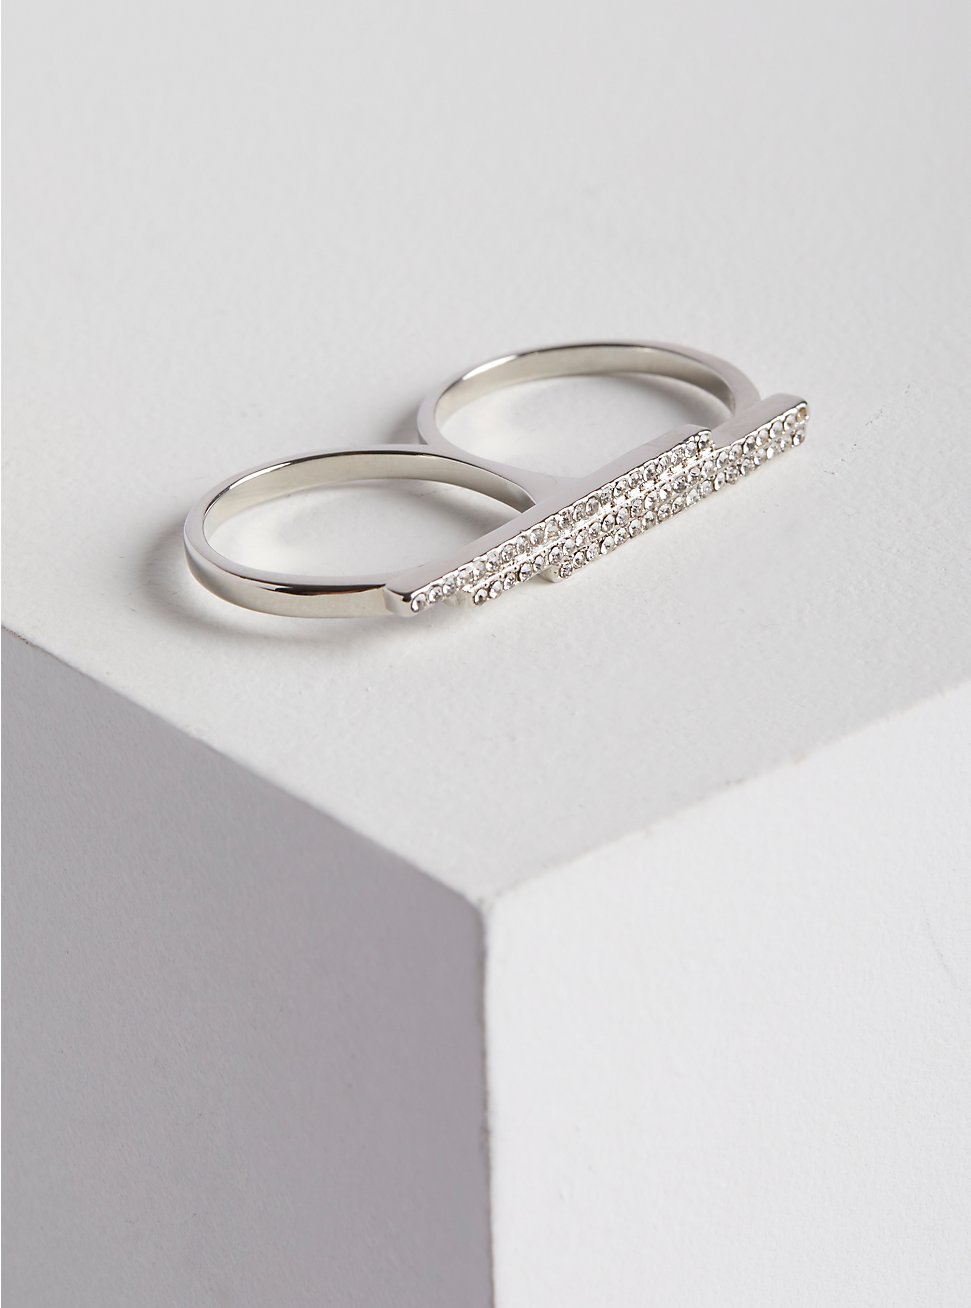 Pave Double Ring - Silver Tone, SILVER, hi-res